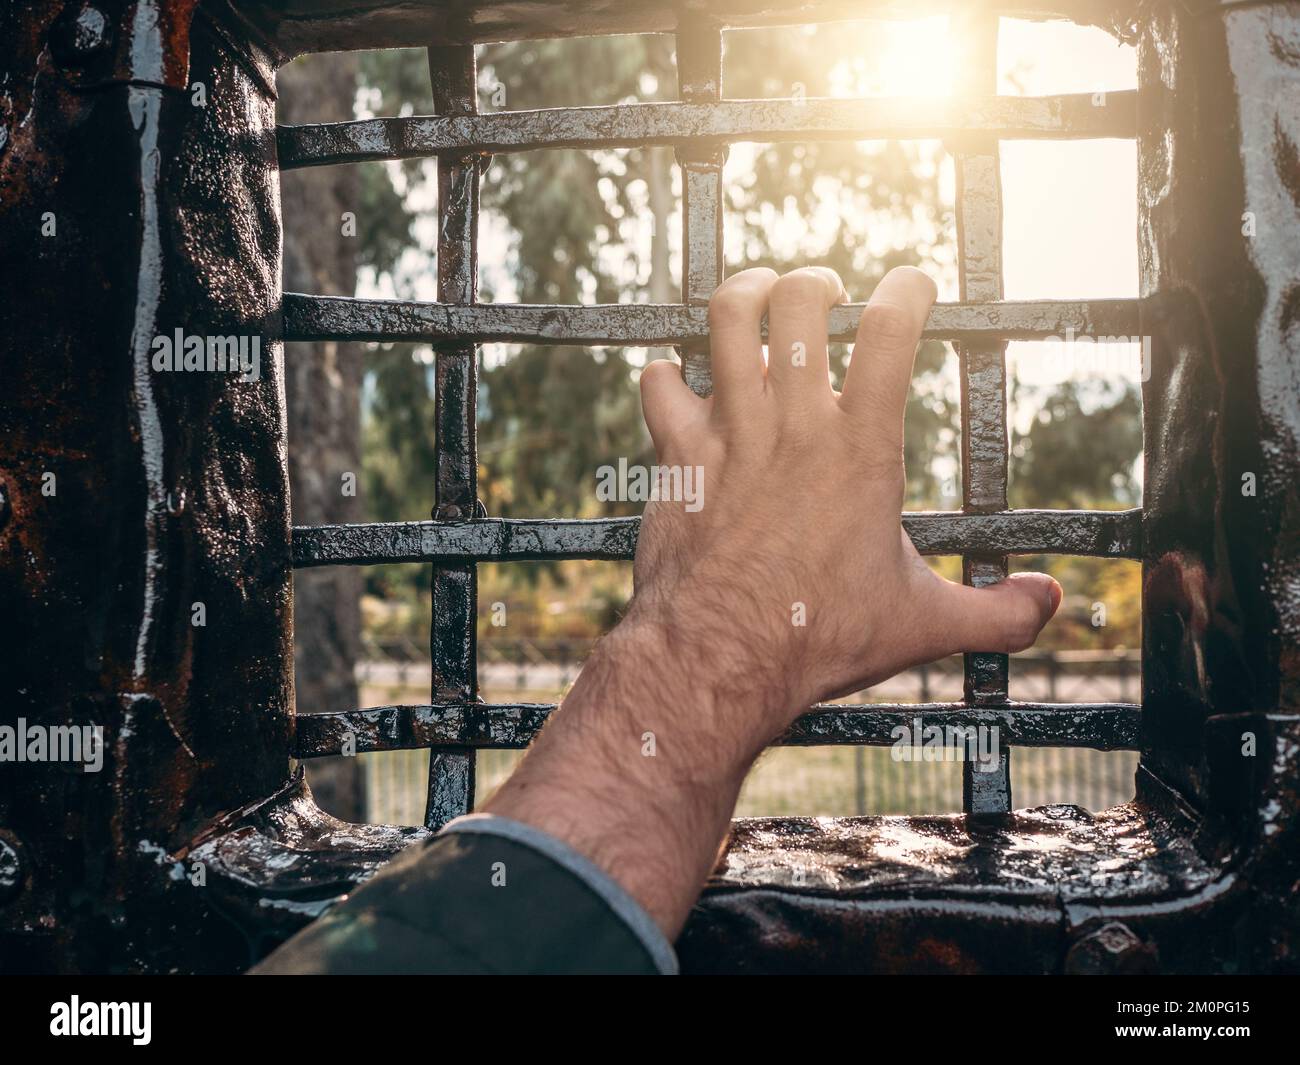 Man hand on iron grate. Criminal in captivity or imprisonment concept. Stock Photo